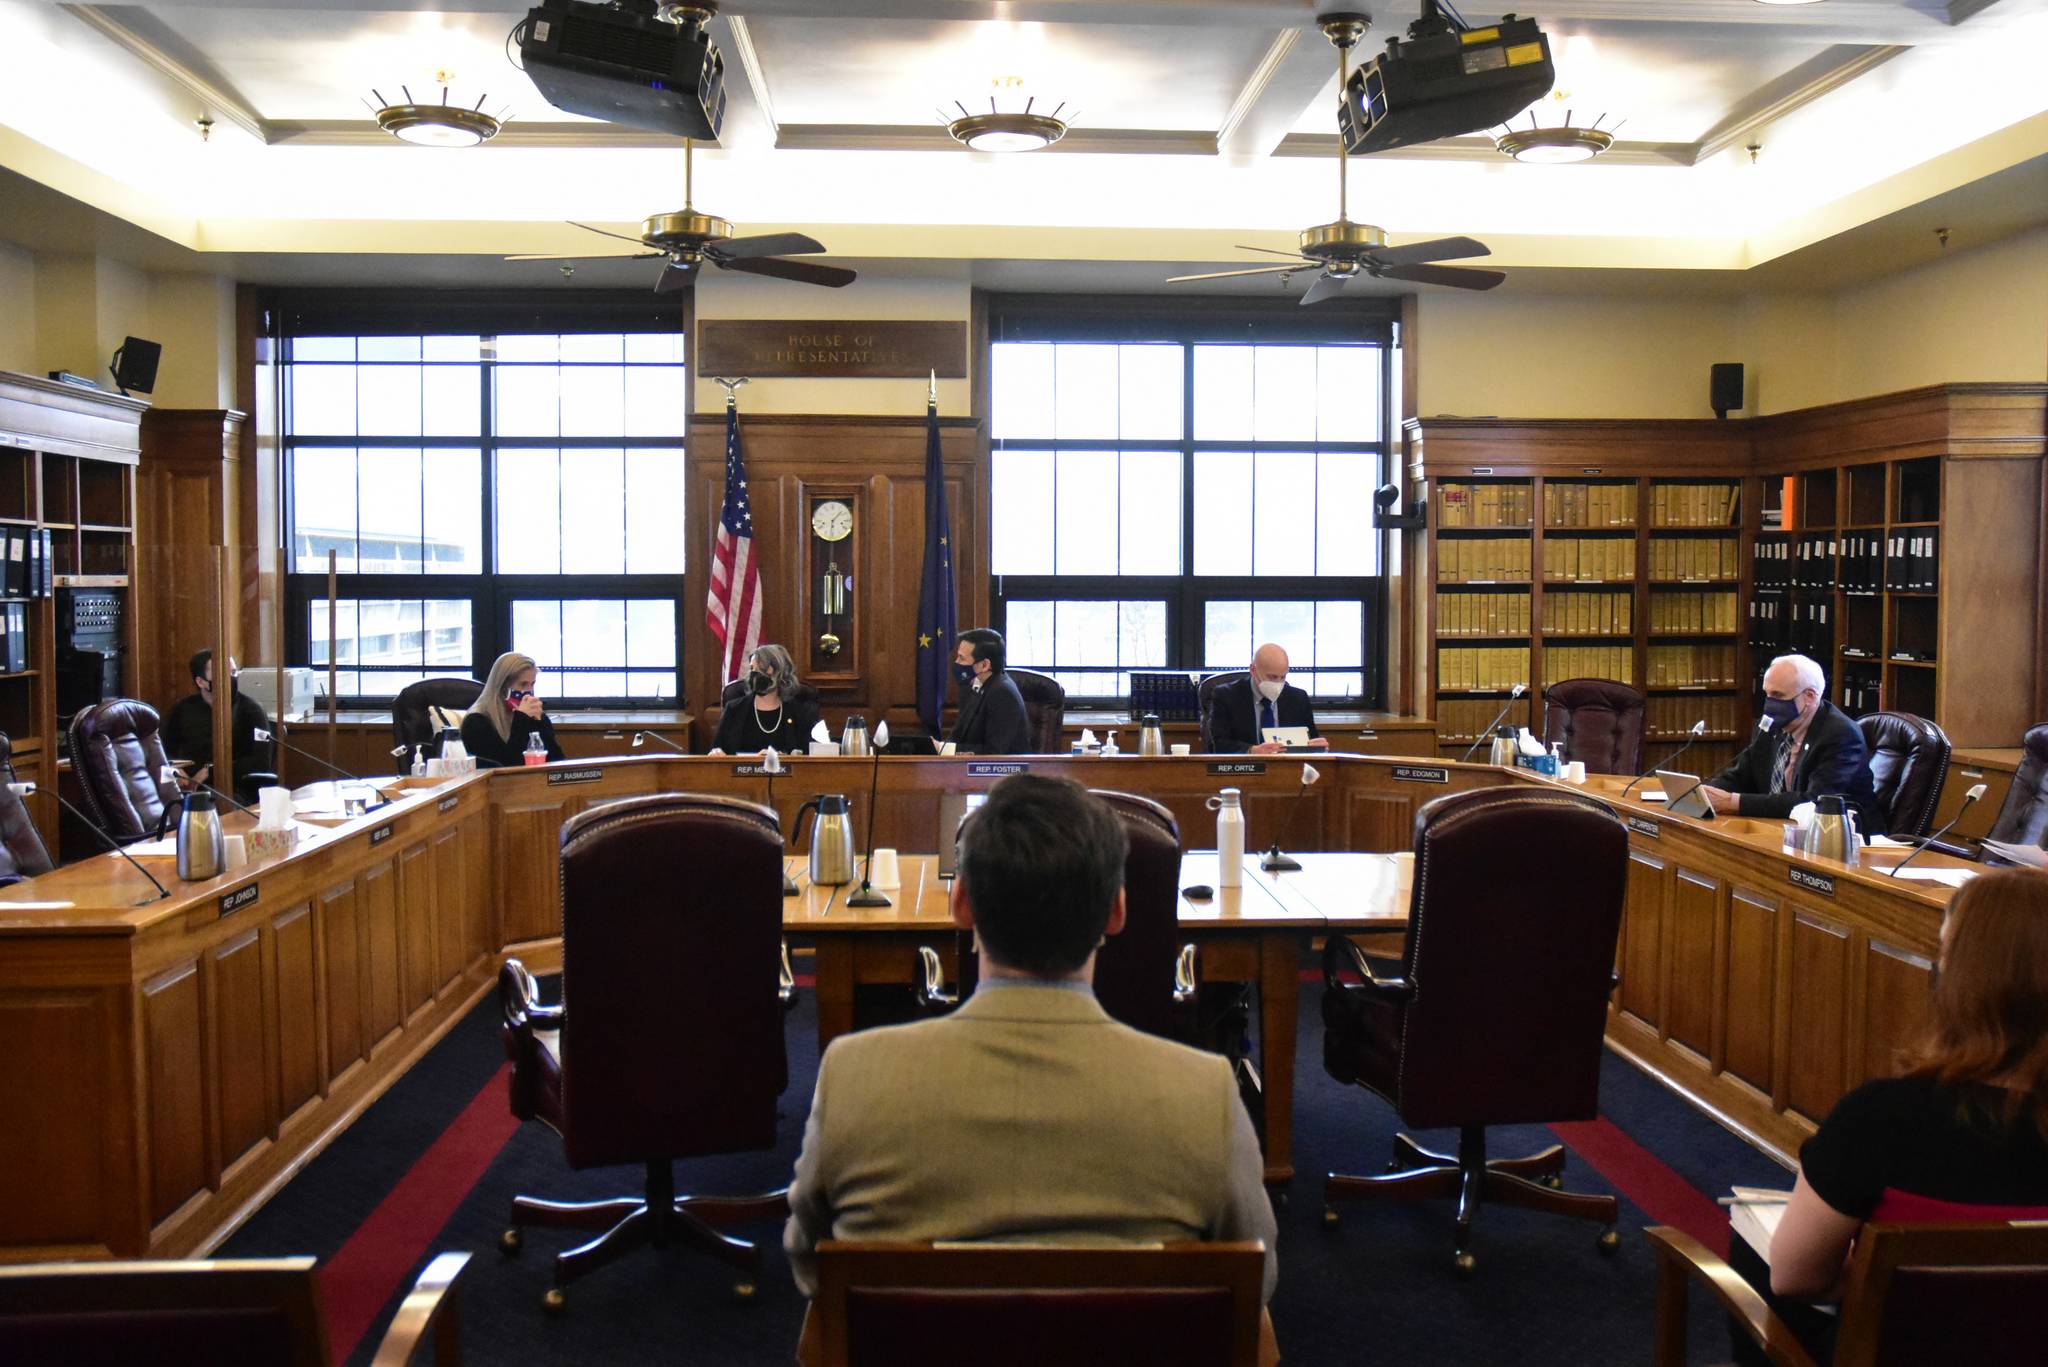 Members of the Alaska House of Representatives gather for a Finance Committee meeting on Monday, March 1, 2021 even after a staff member had tested positive for COVID-19. Meetings were canceled last week after Rep. Mike Cronk, R-Tok, tested positive. (Peter Segall / Juneau Empire)